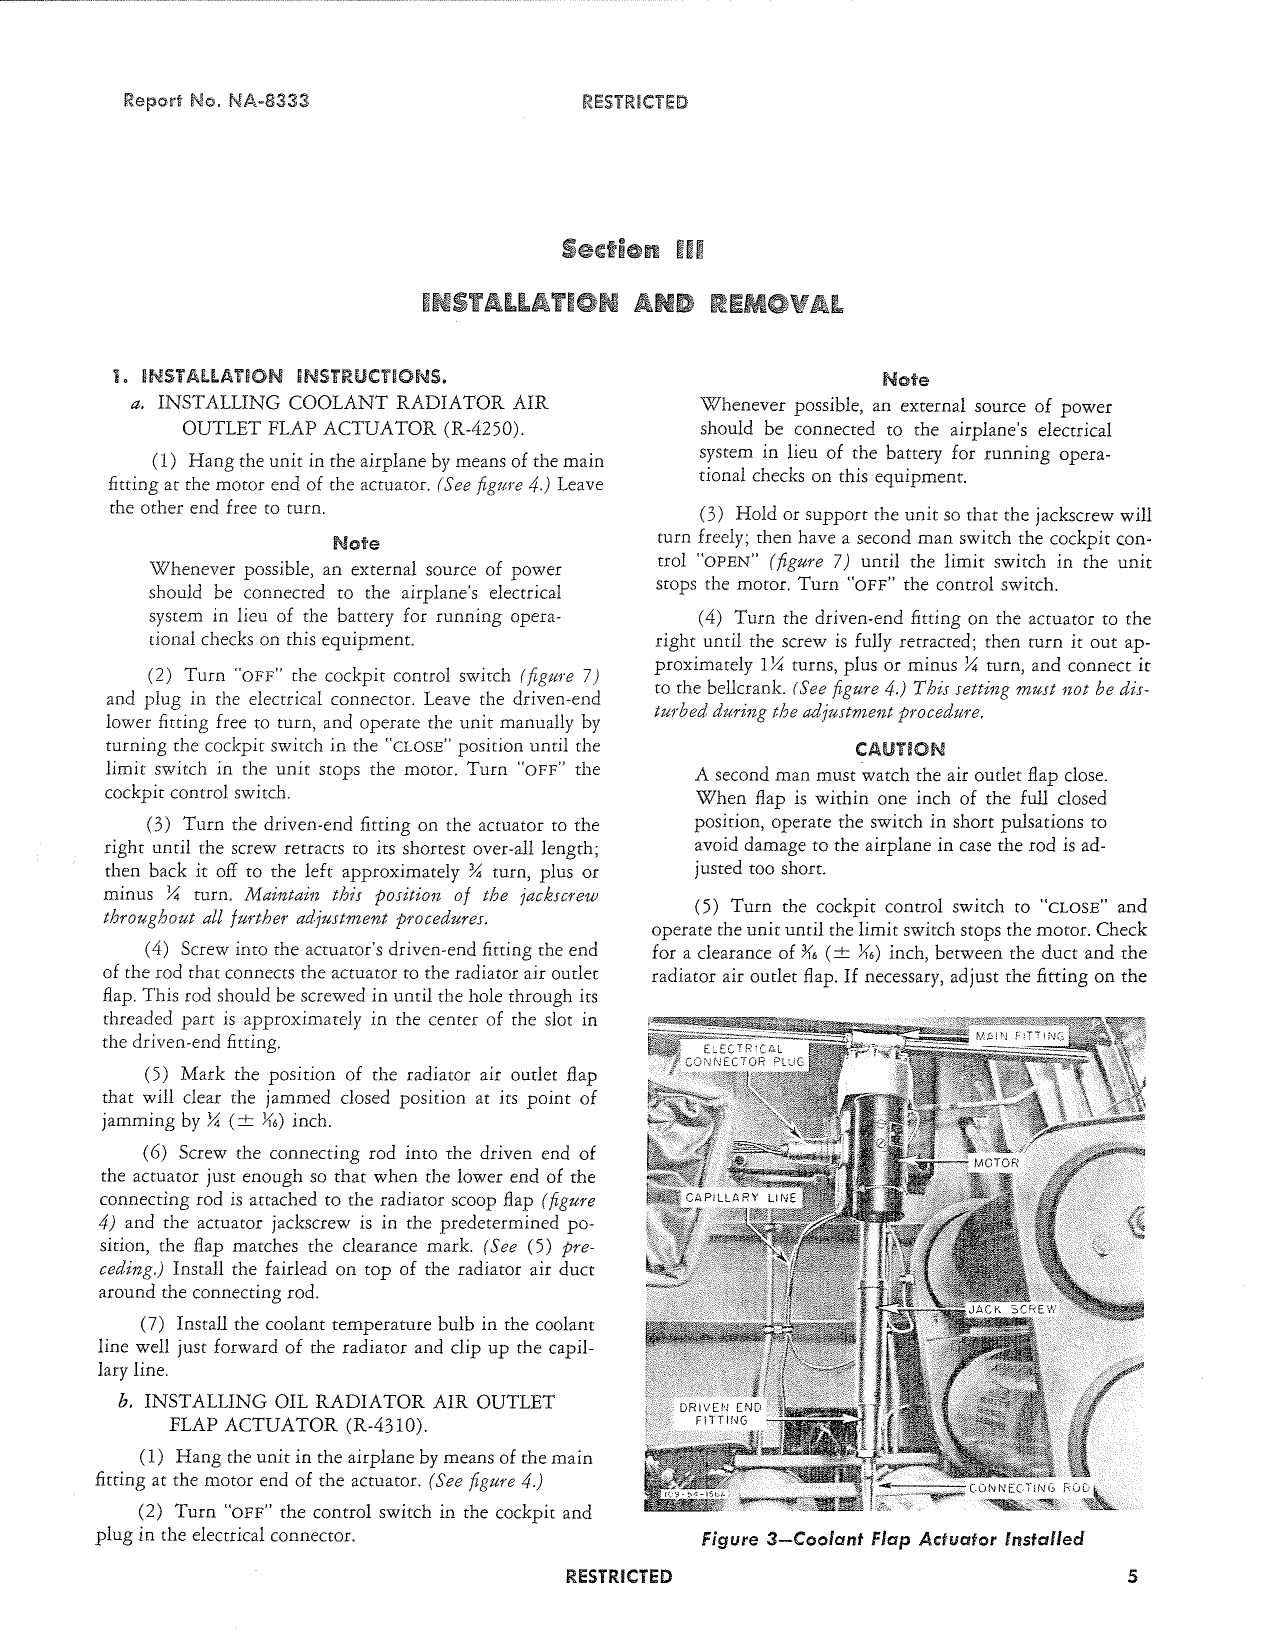 Sample page 8 from AirCorps Library document: Service Manual for Robertshaw Actuators Models R-4310 and R-4250